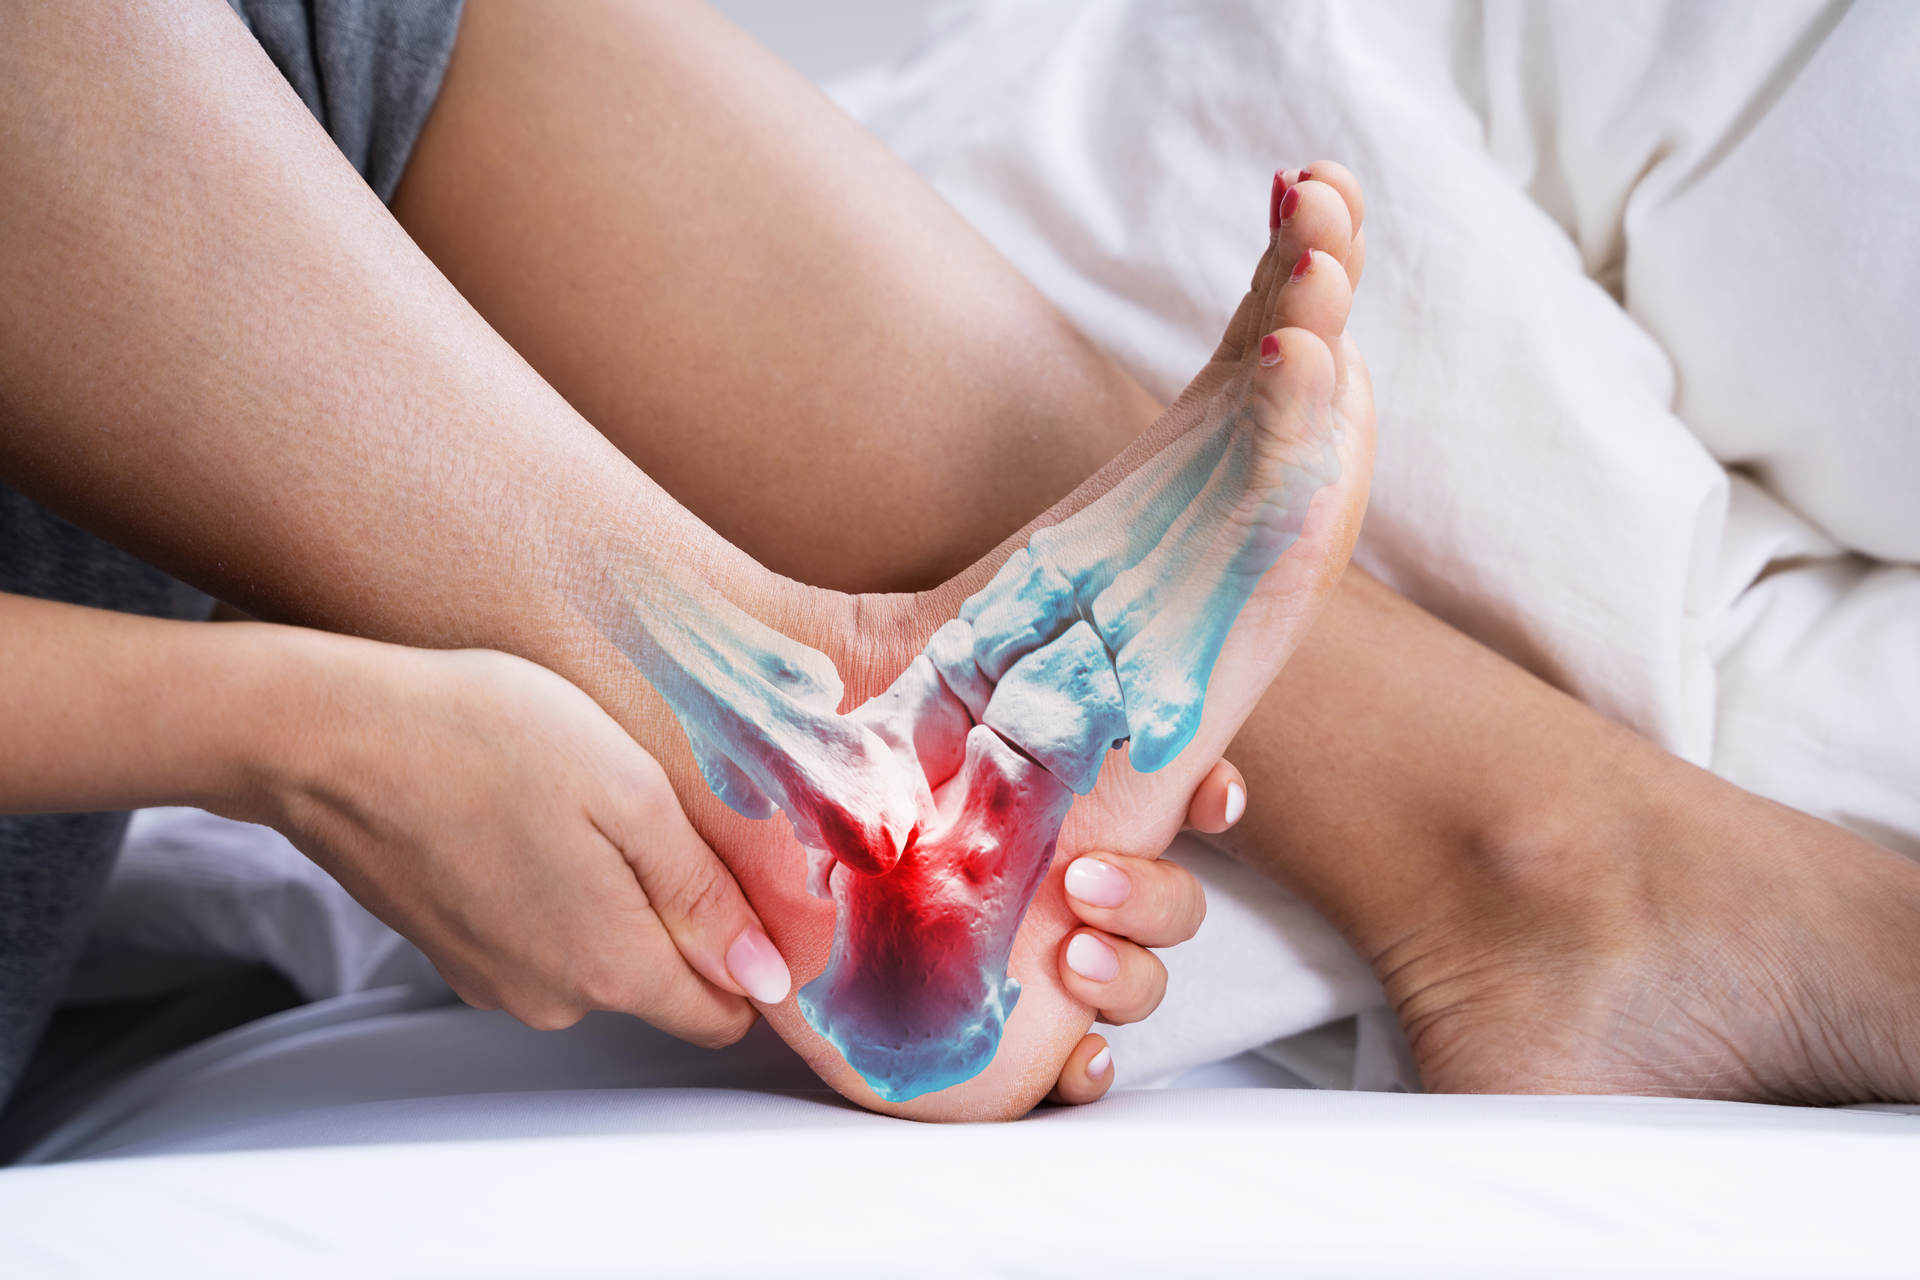 Effective Heel Pain Relief with Acupuncture and TCM